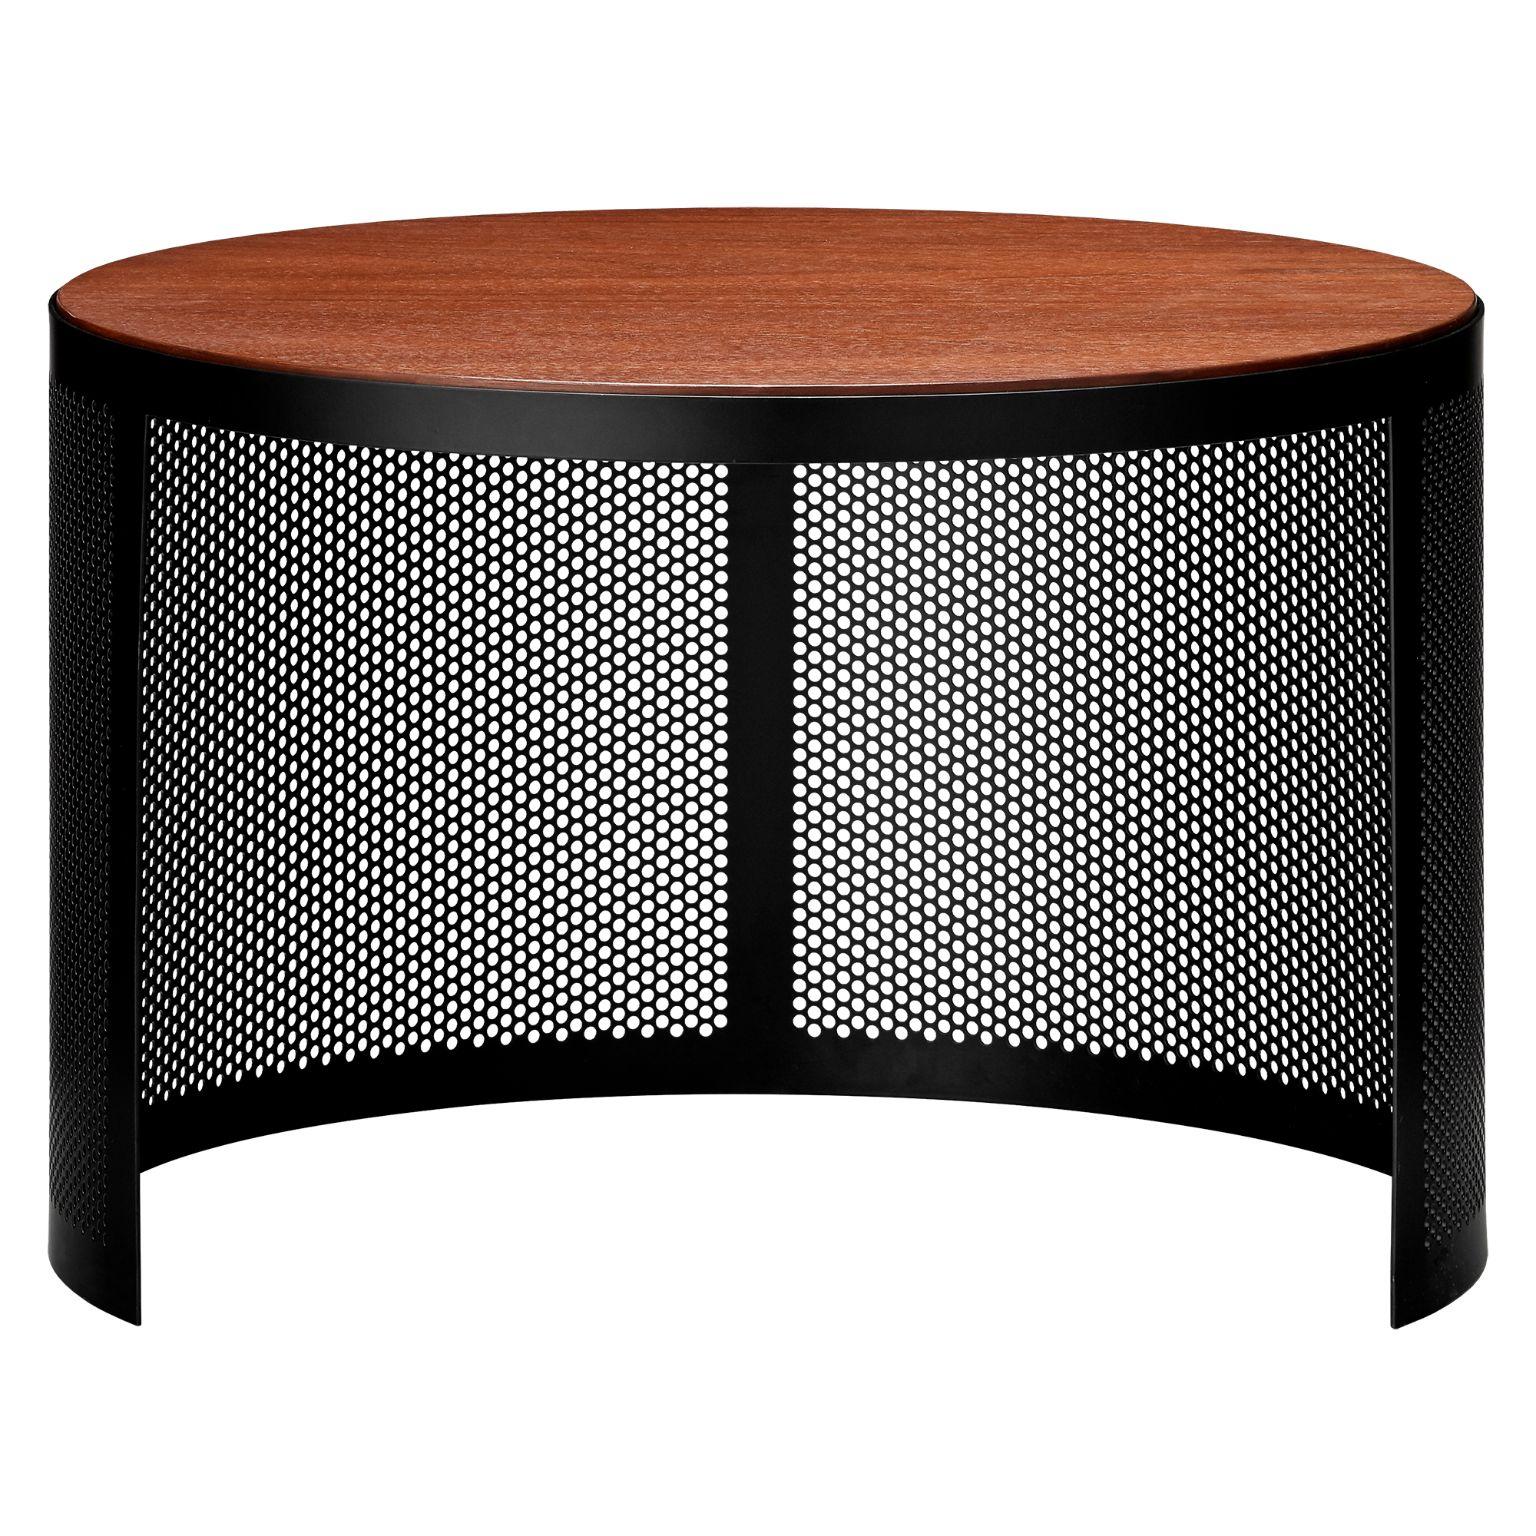 Walnut and steel contemporary small side table
Dimensions: Ø 46 x H 30.2 CM
Materials: Walnut, steel 

This tables can be placed in any room that calls for extra creative space. They are made of perforated metal in black and have either a high